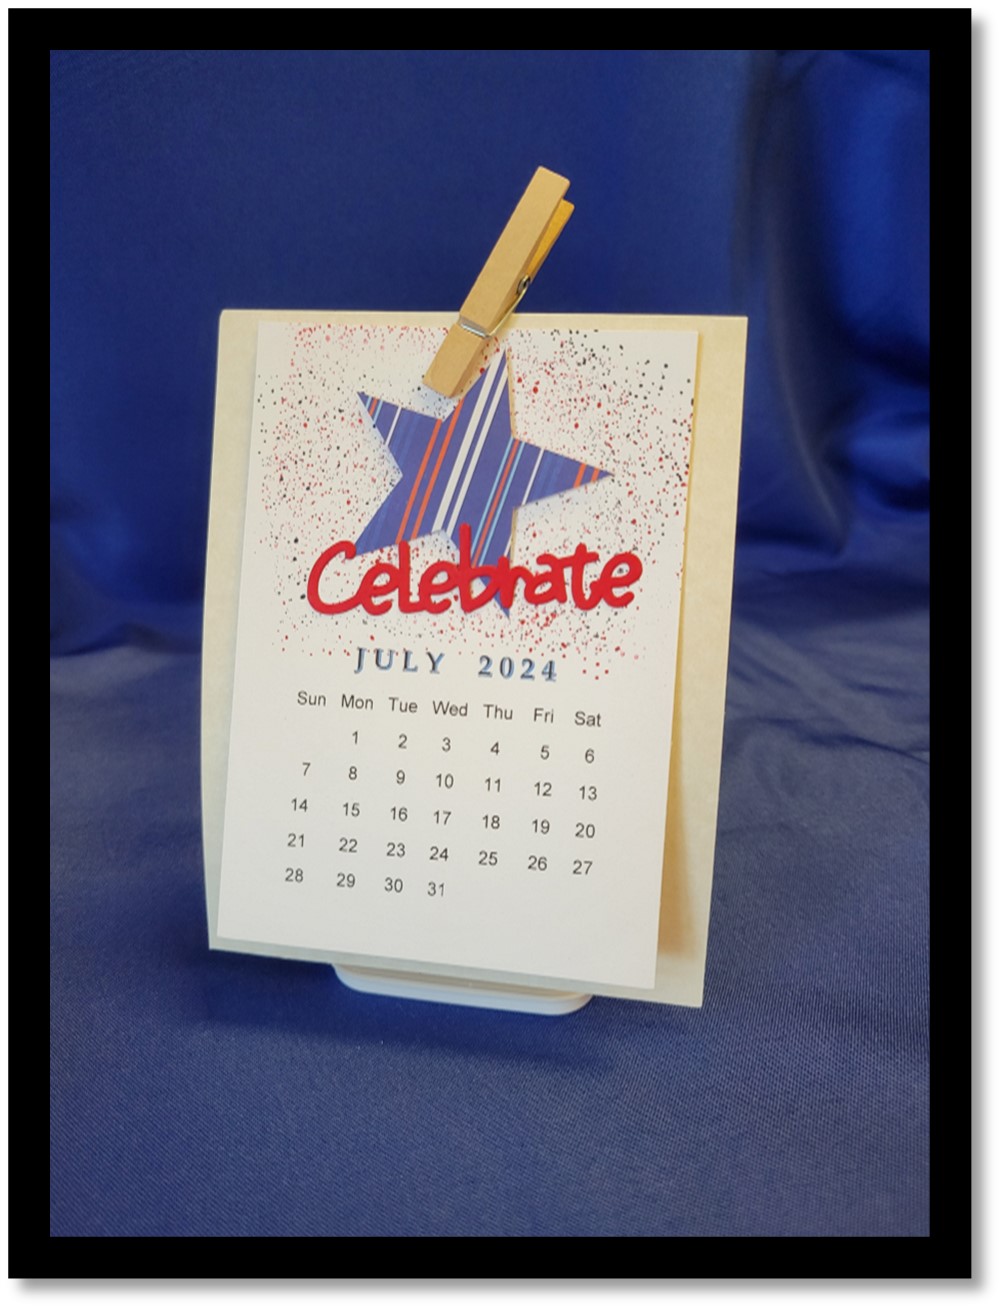 Sample of a calendar for July 2024 with a star and the word Celebrate